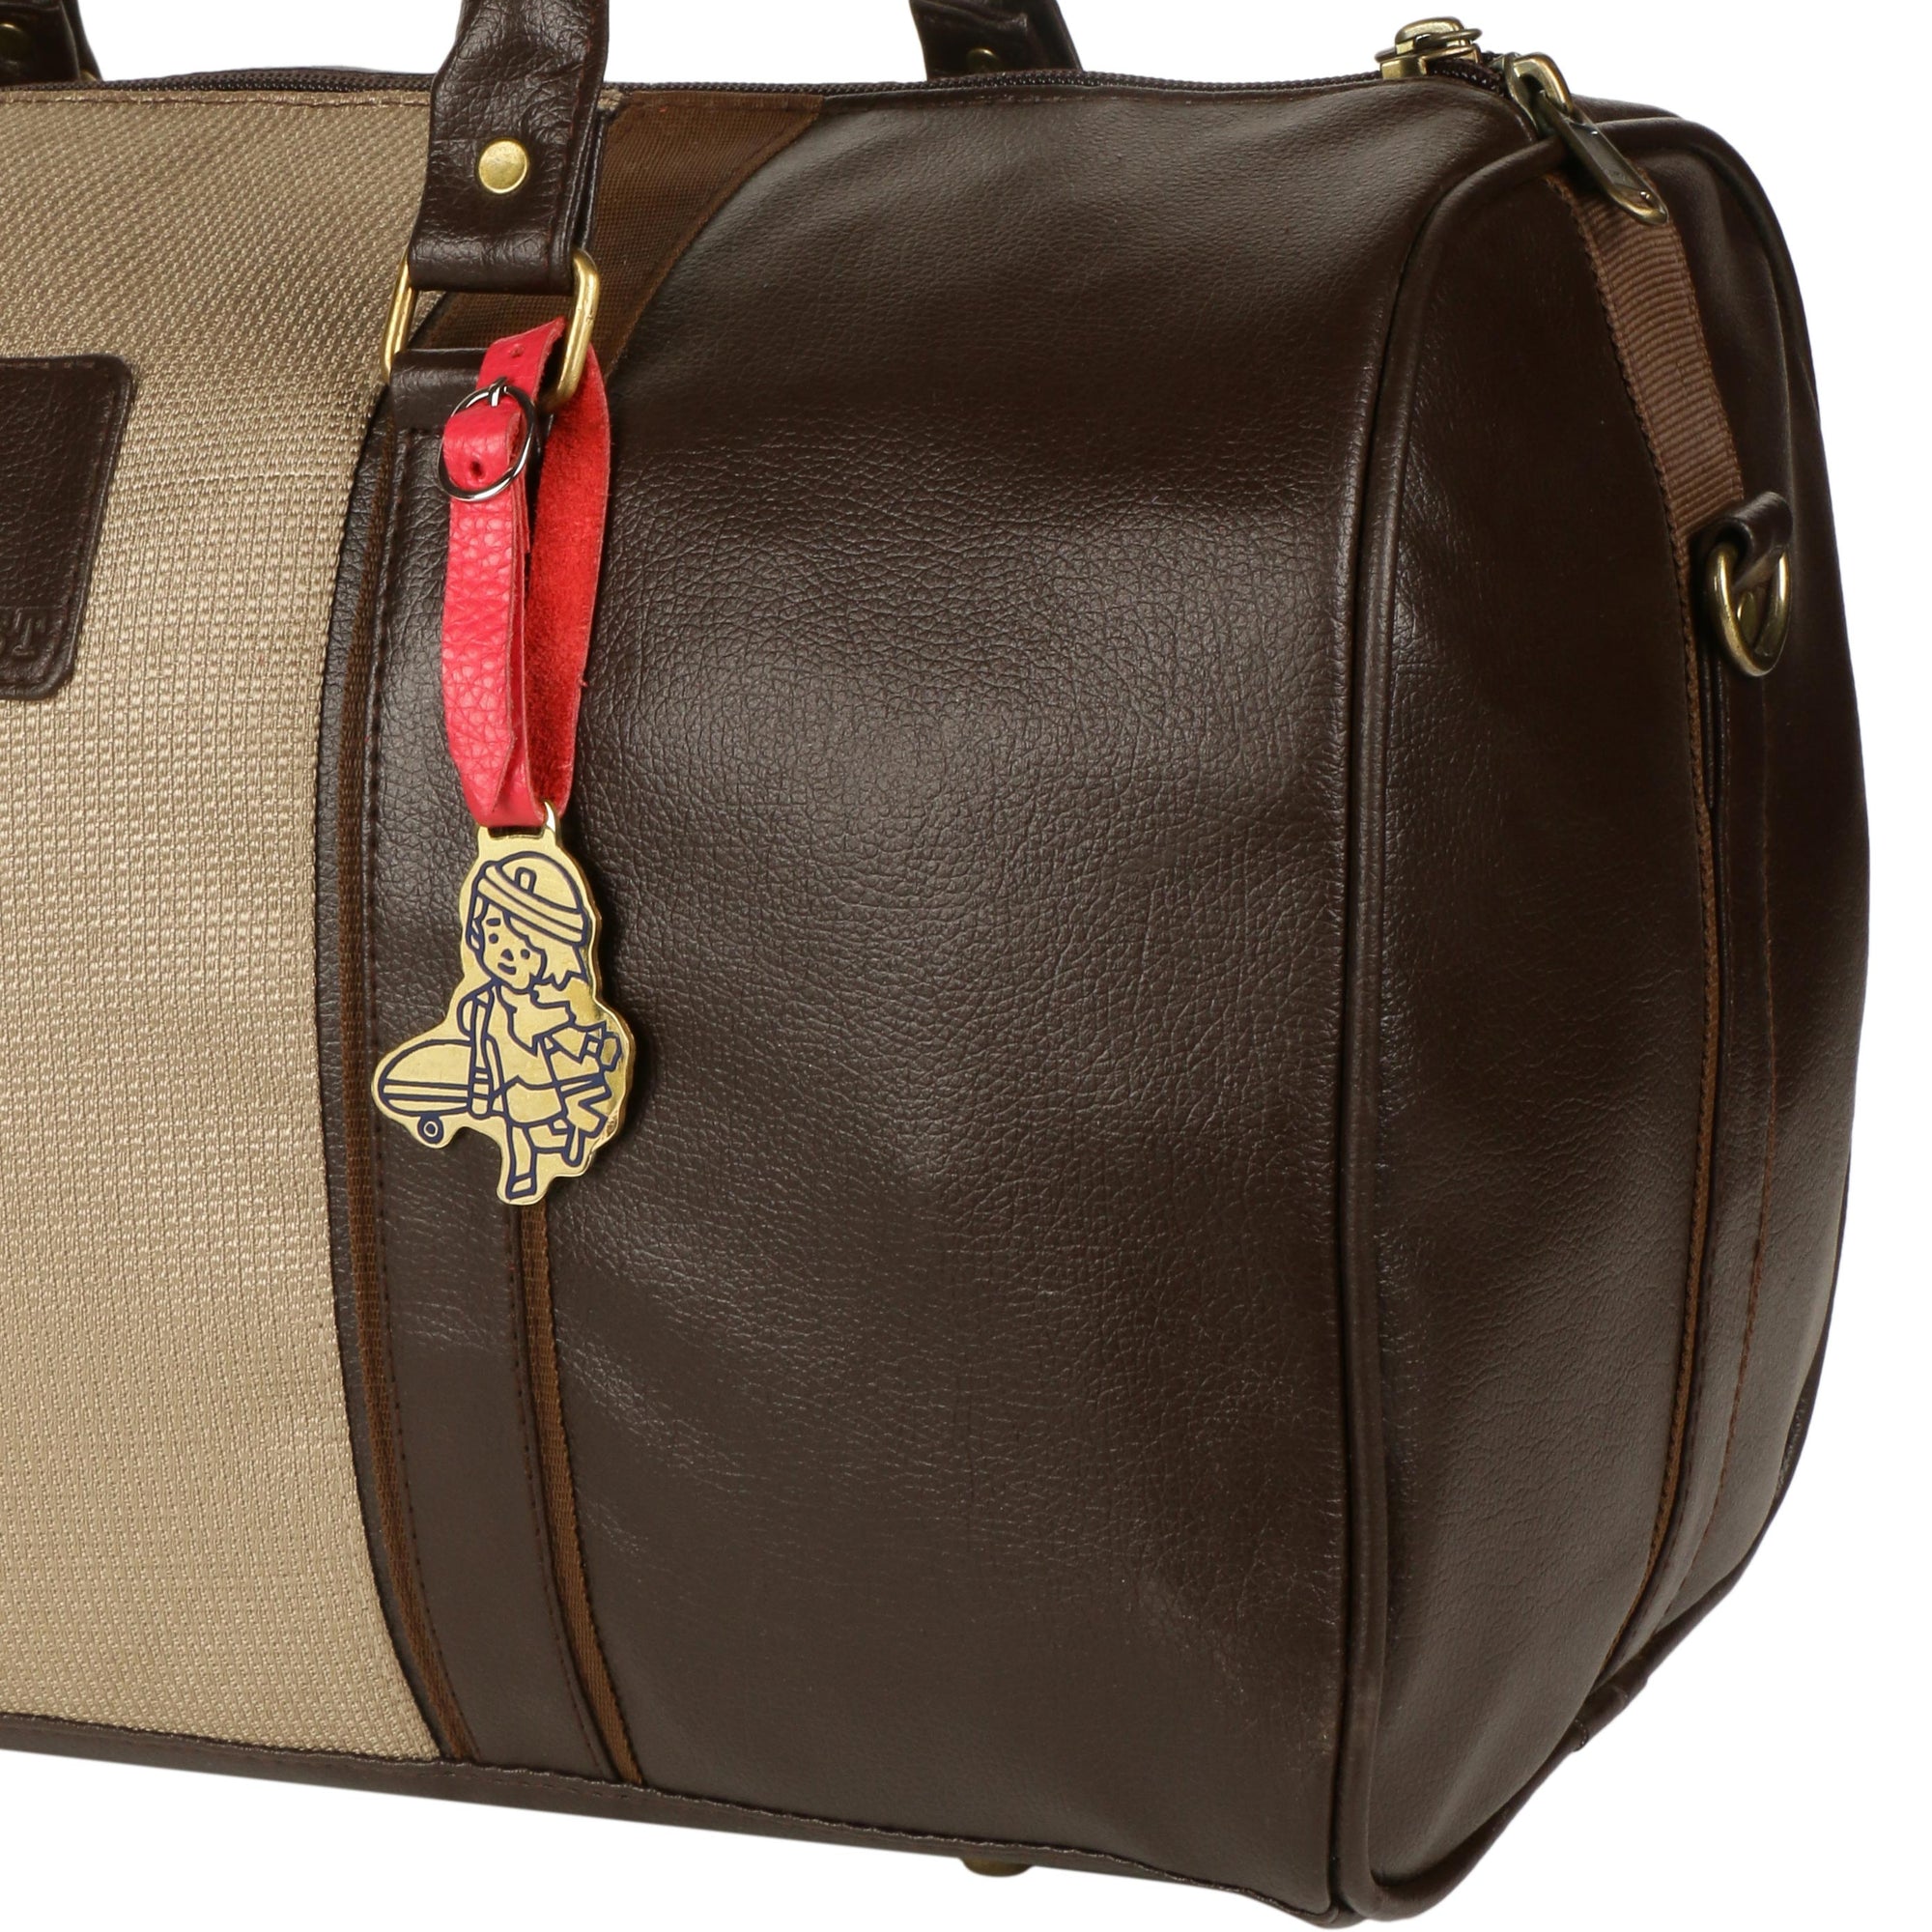 Cute Flight Attendant Brass Tag with red latch being used on a duffel bag.